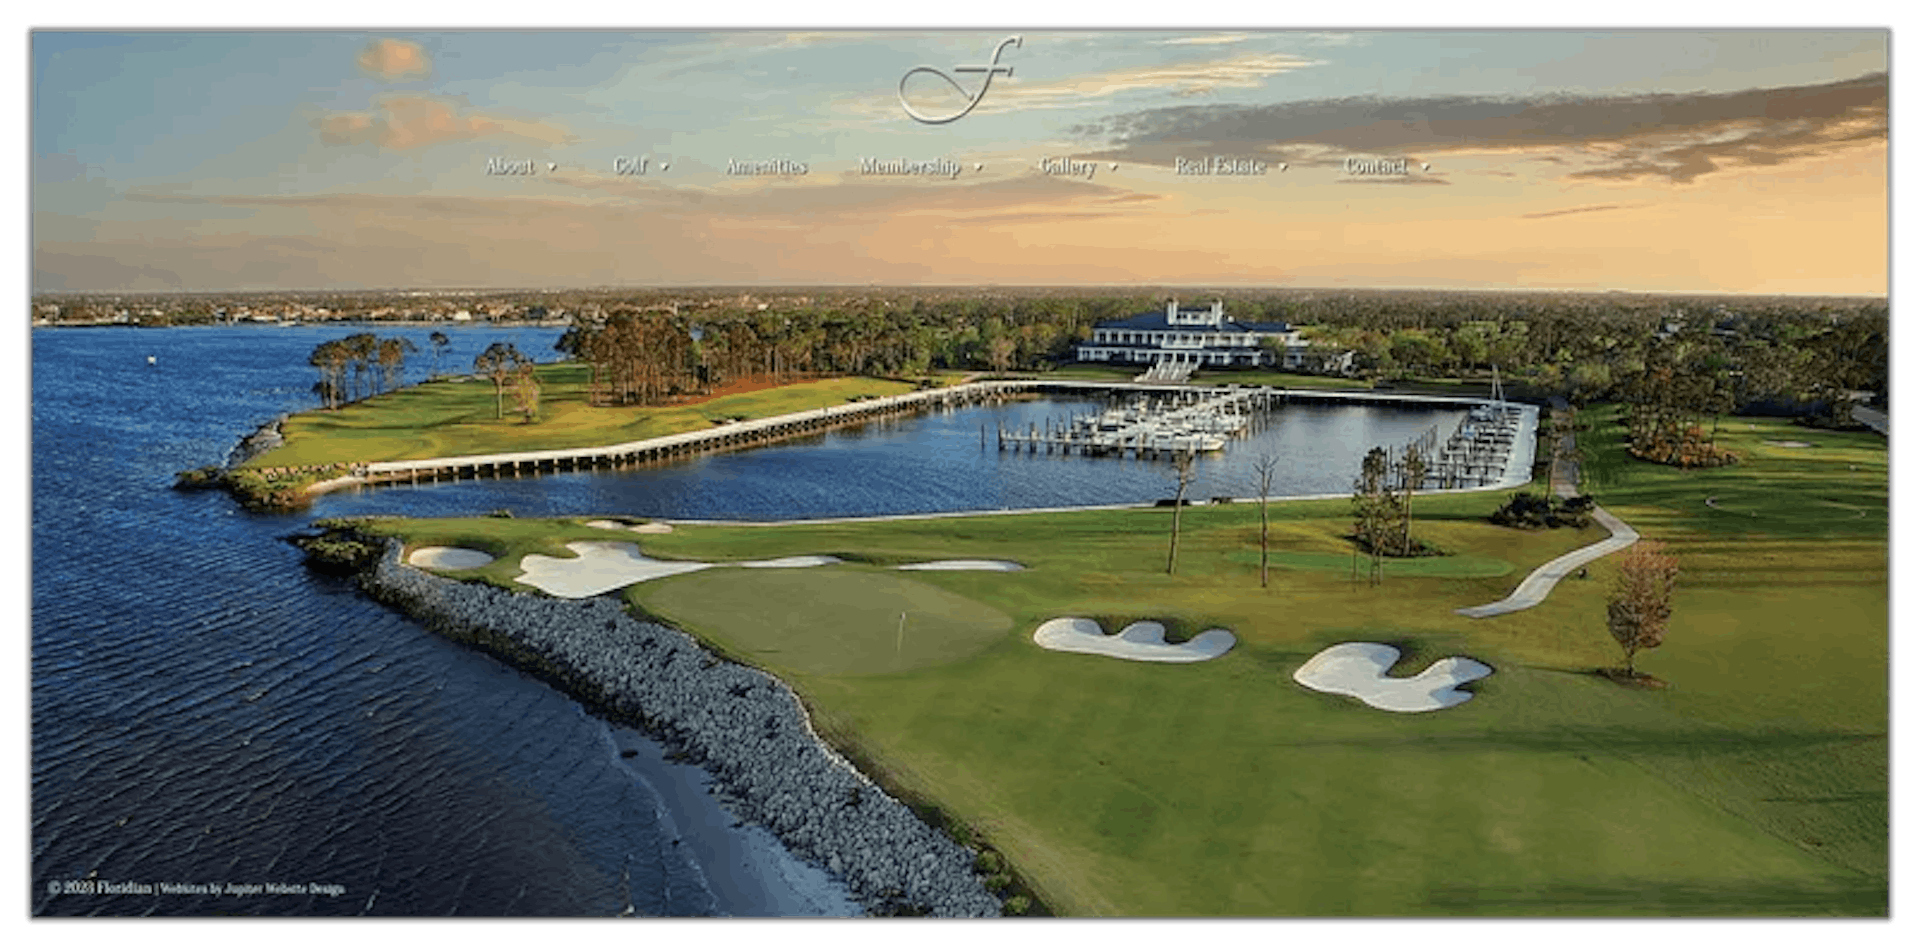 One of the crown jewels of Huizenga’s business empire was the Floridian golf and yacht club. When Huizenga owned the property, he gave honorary invitations to some 200 close friends without charging them an initiation fee or dues. Thomas was seen by several employees at the club over the years. Credit: Floridian Website